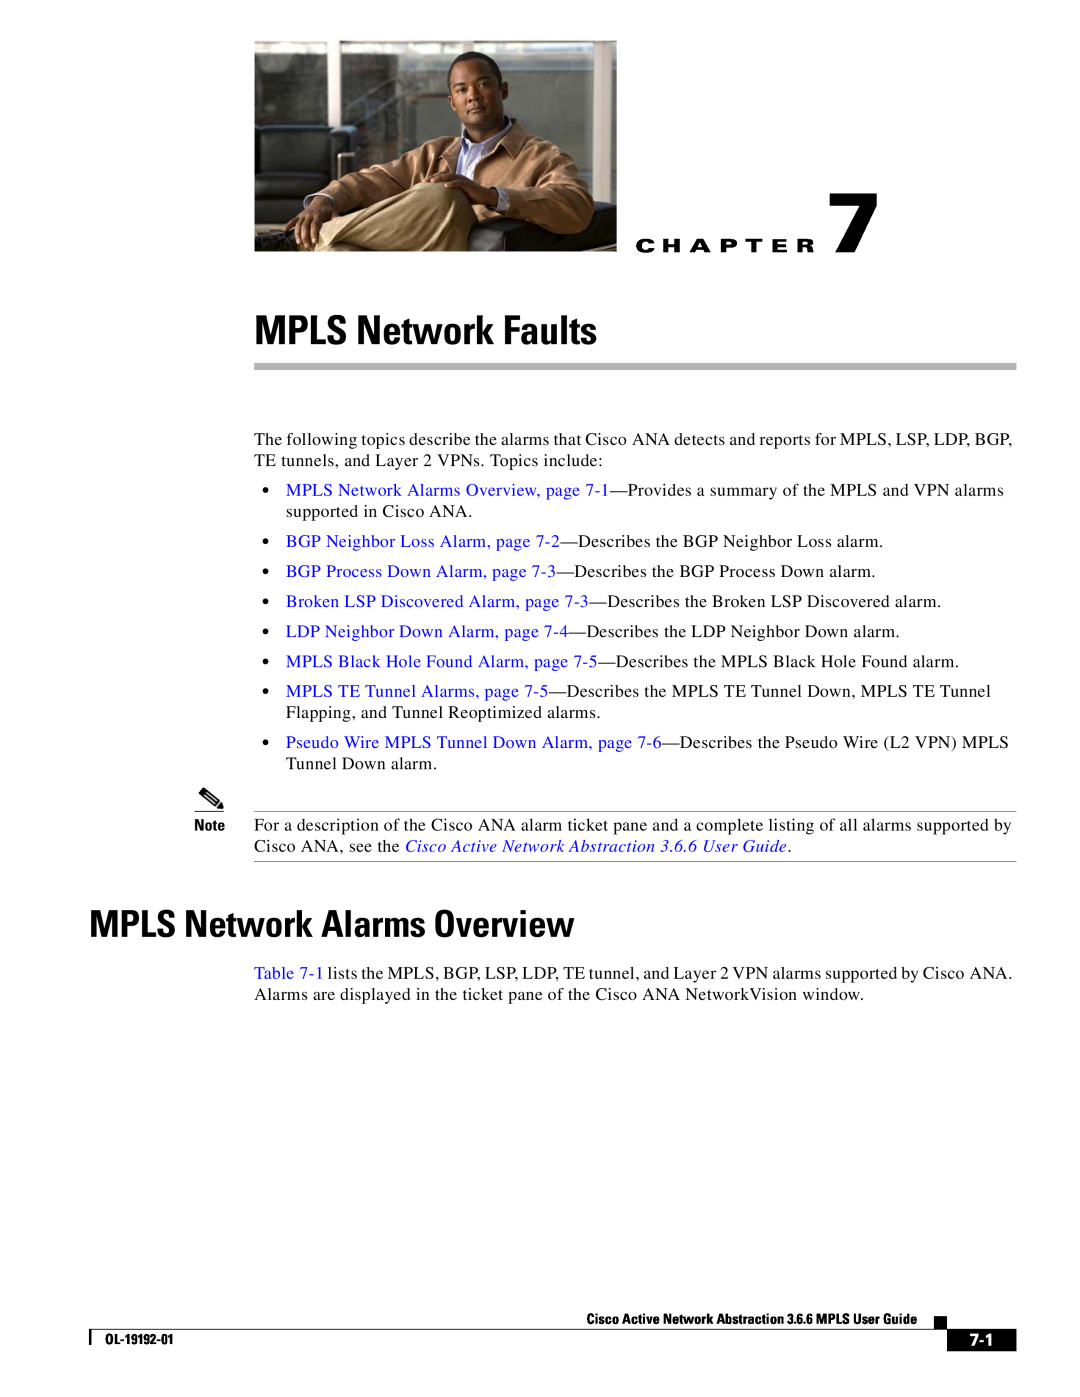 Cisco Systems 3.6.6 manual MPLS Network Faults, MPLS Network Alarms Overview, C H A P T E R 